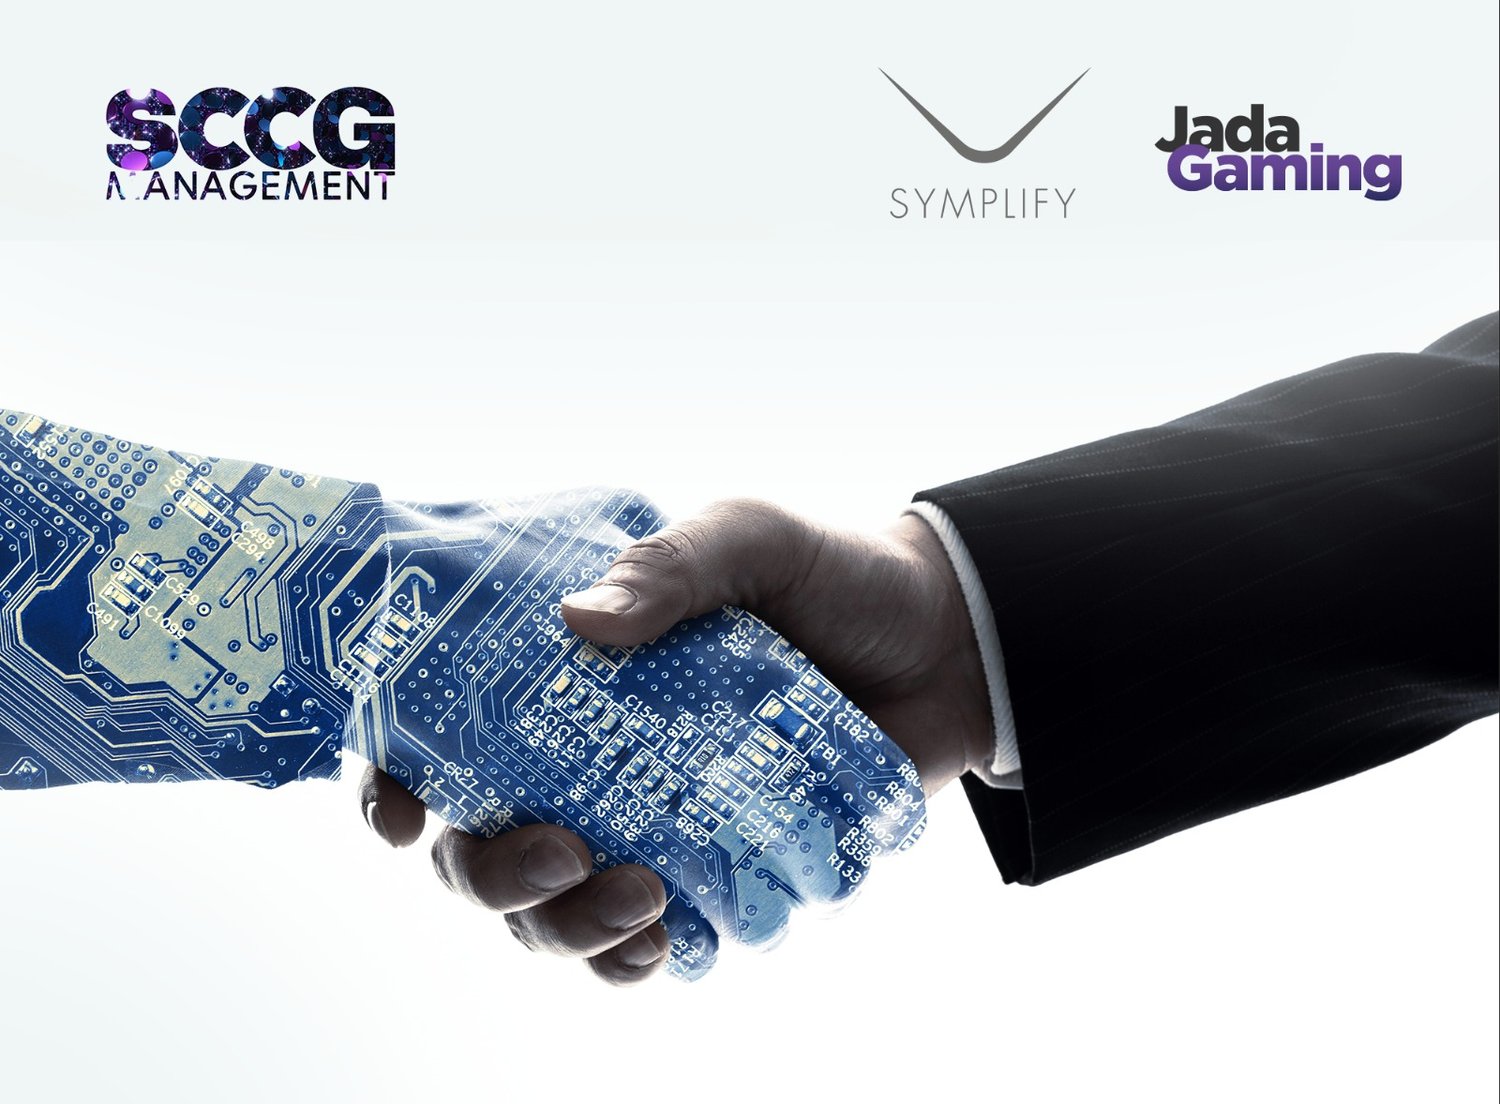 Symplify and Jada Gaming sign strategic partnership with SCCG to spearhead North American expansion